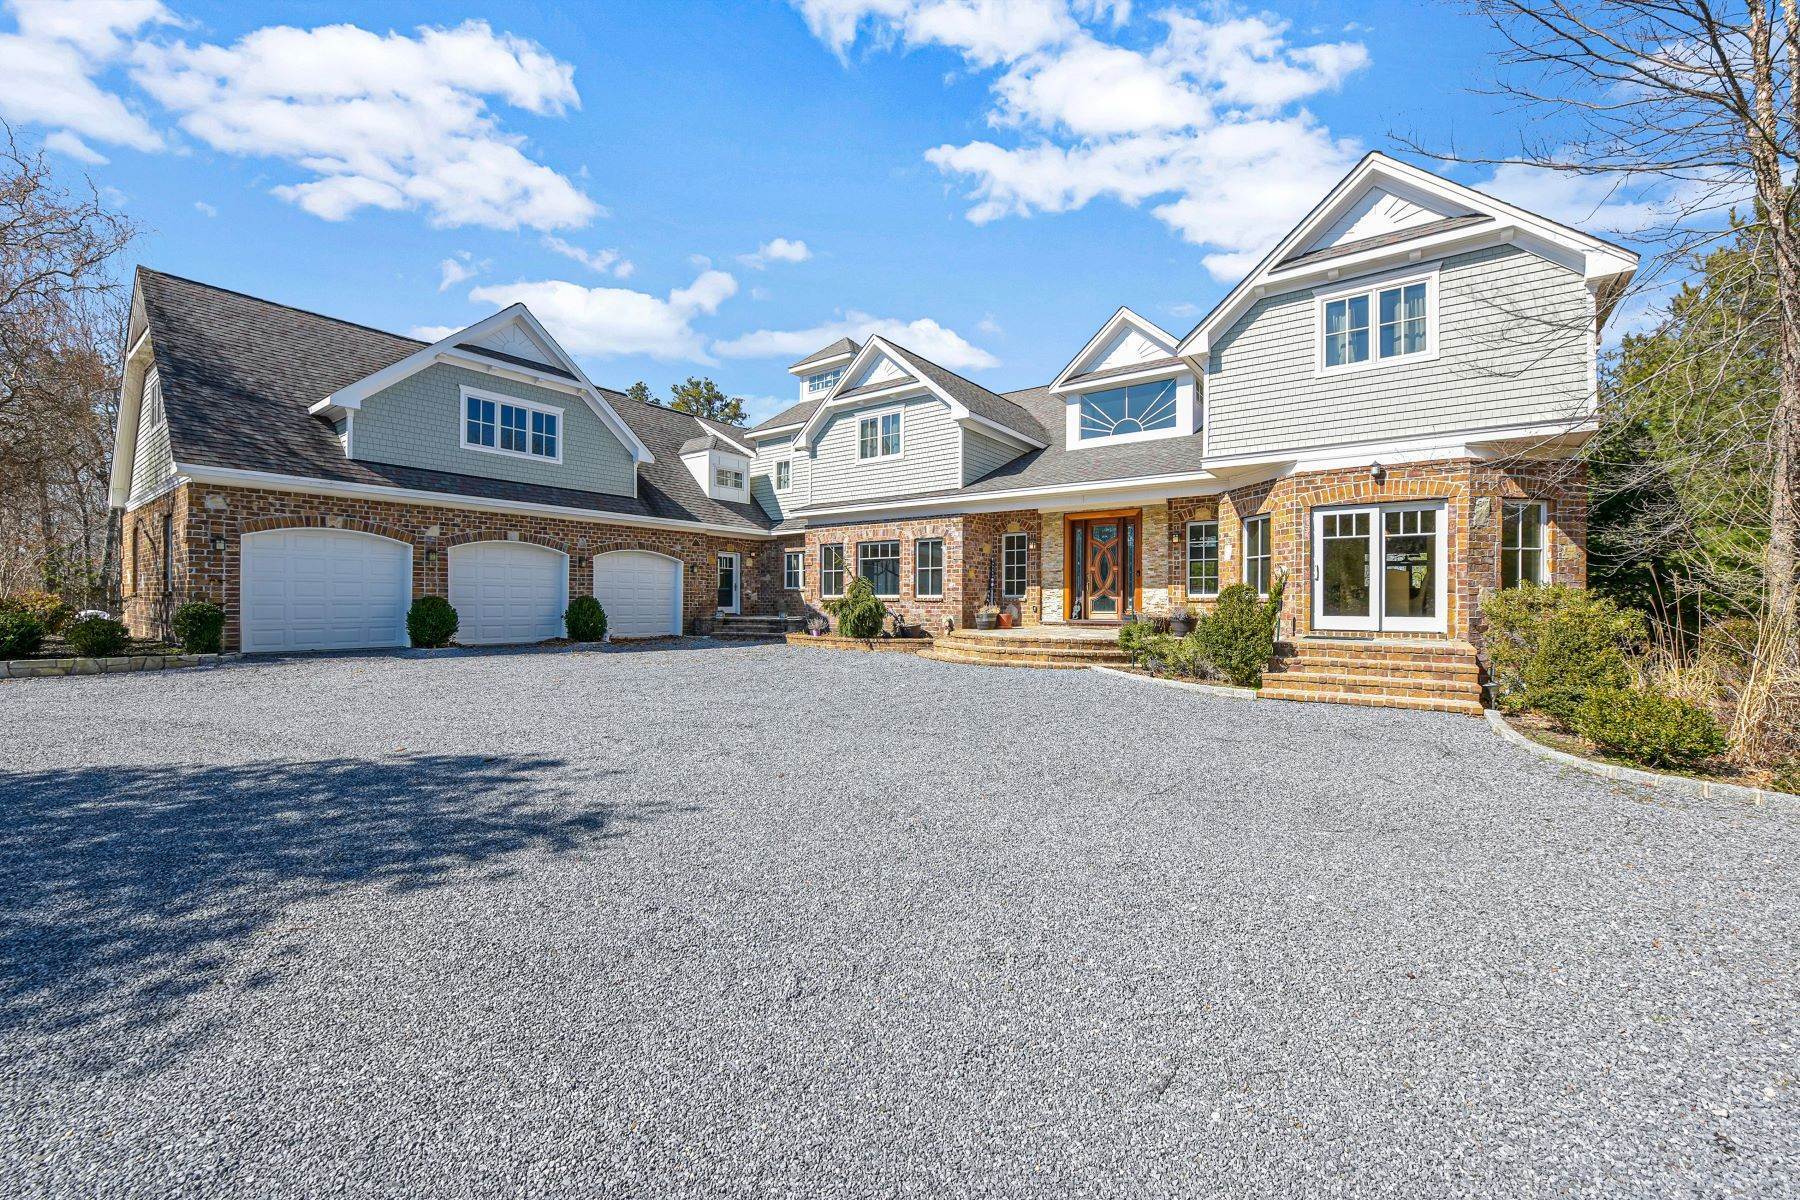 Single Family Homes for Sale at 14 Red Creek Circle, Hampton Bays, NY, 11946 14 Red Creek Circle, Hampton Bays, NY, 11946, Hampton Bays, New York 11946 United States